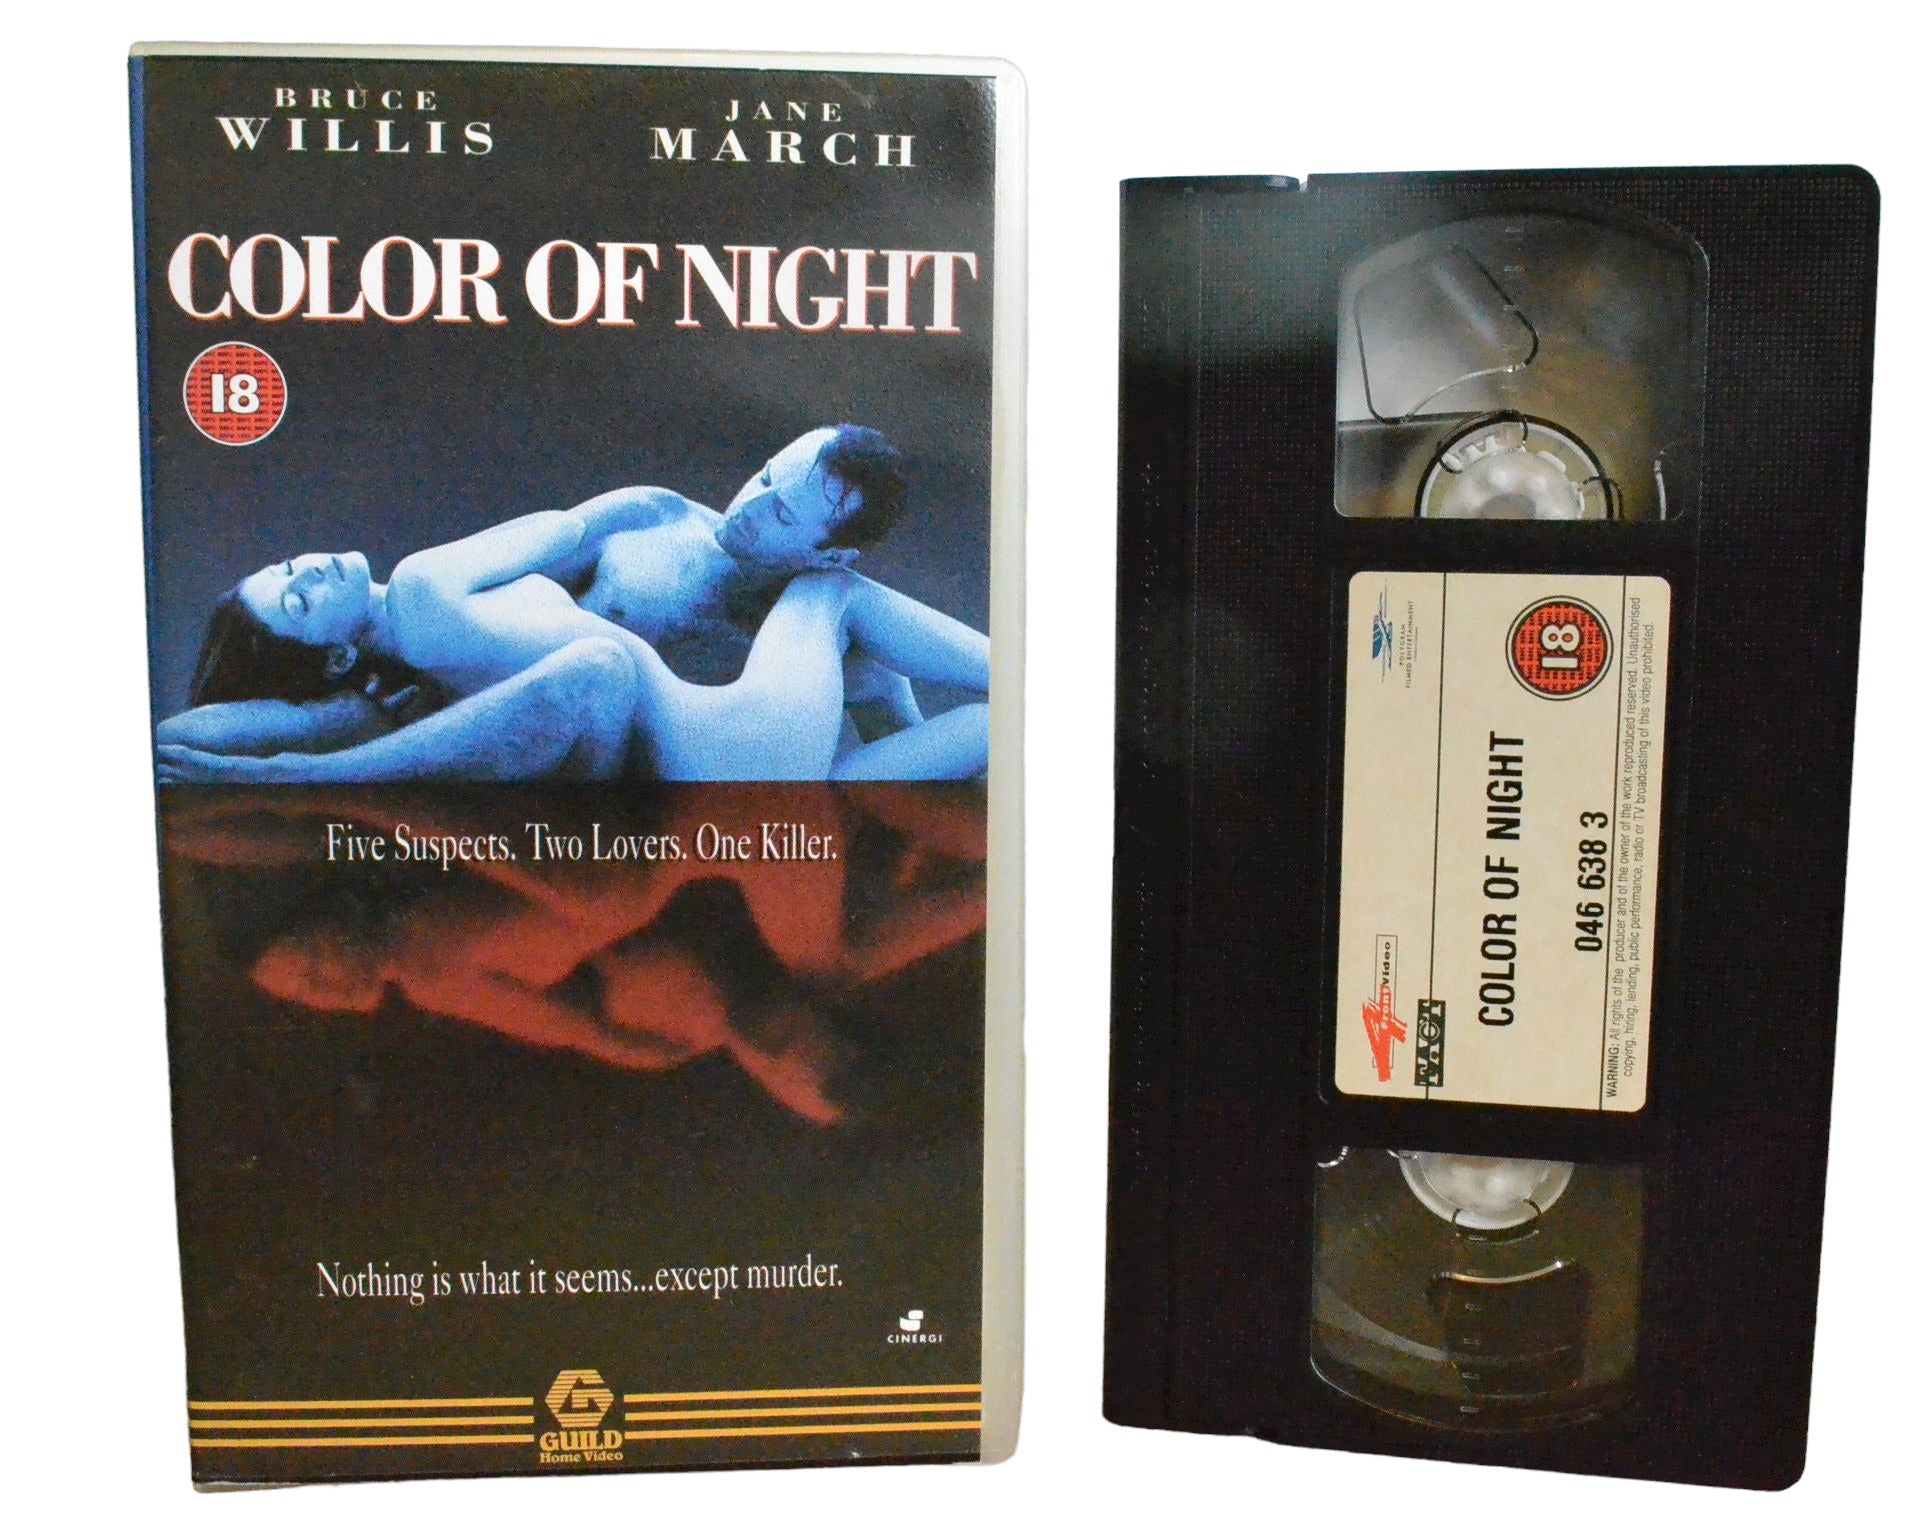 Color Of Night - Bruce Willis - 4 Front Video - Action - Pal - VHS-